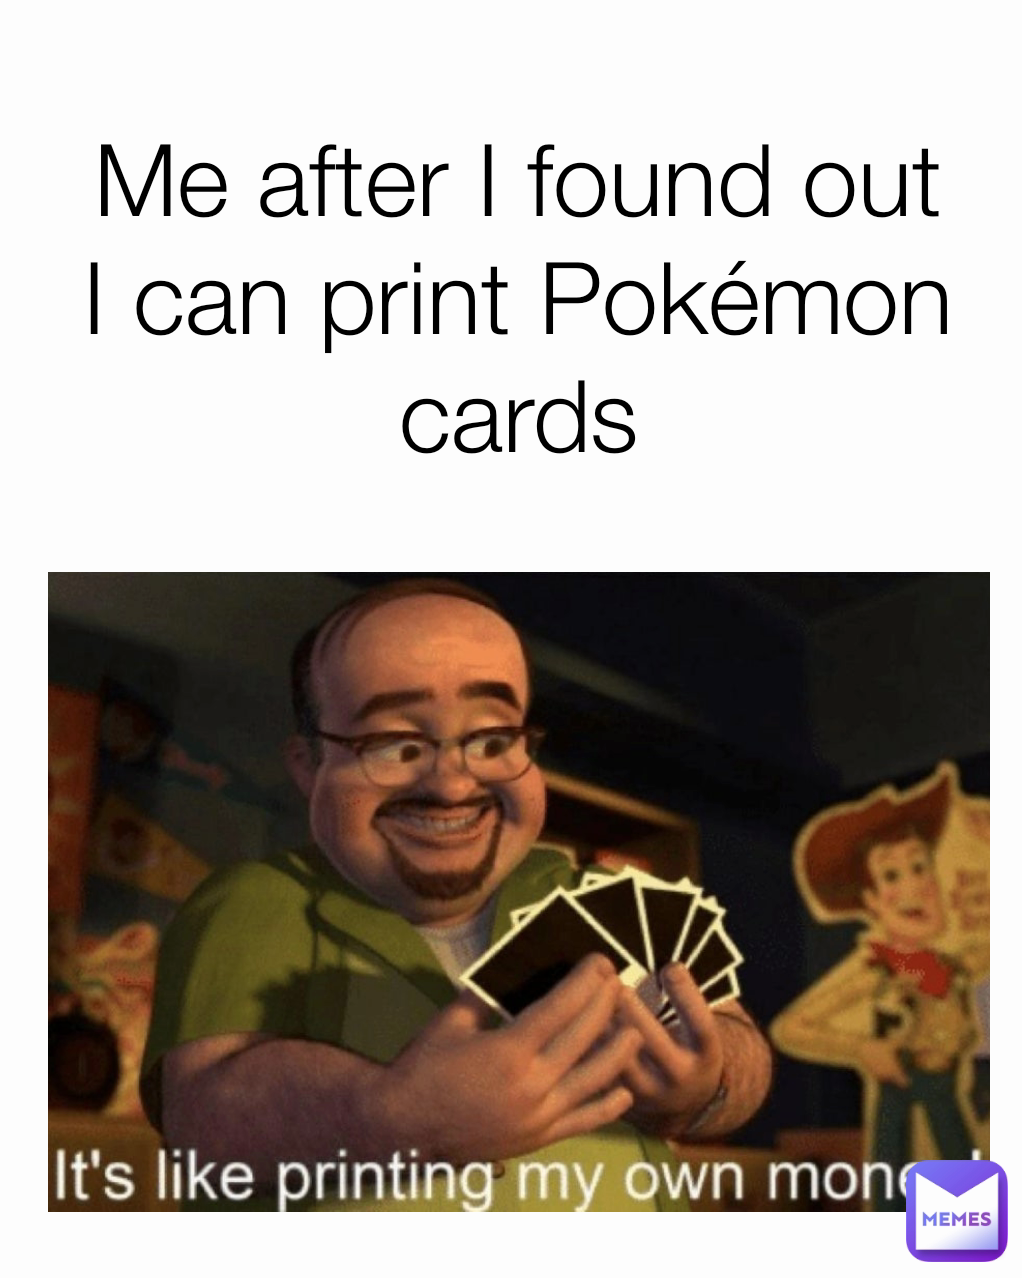 Me after I found out I can print Pokémon cards